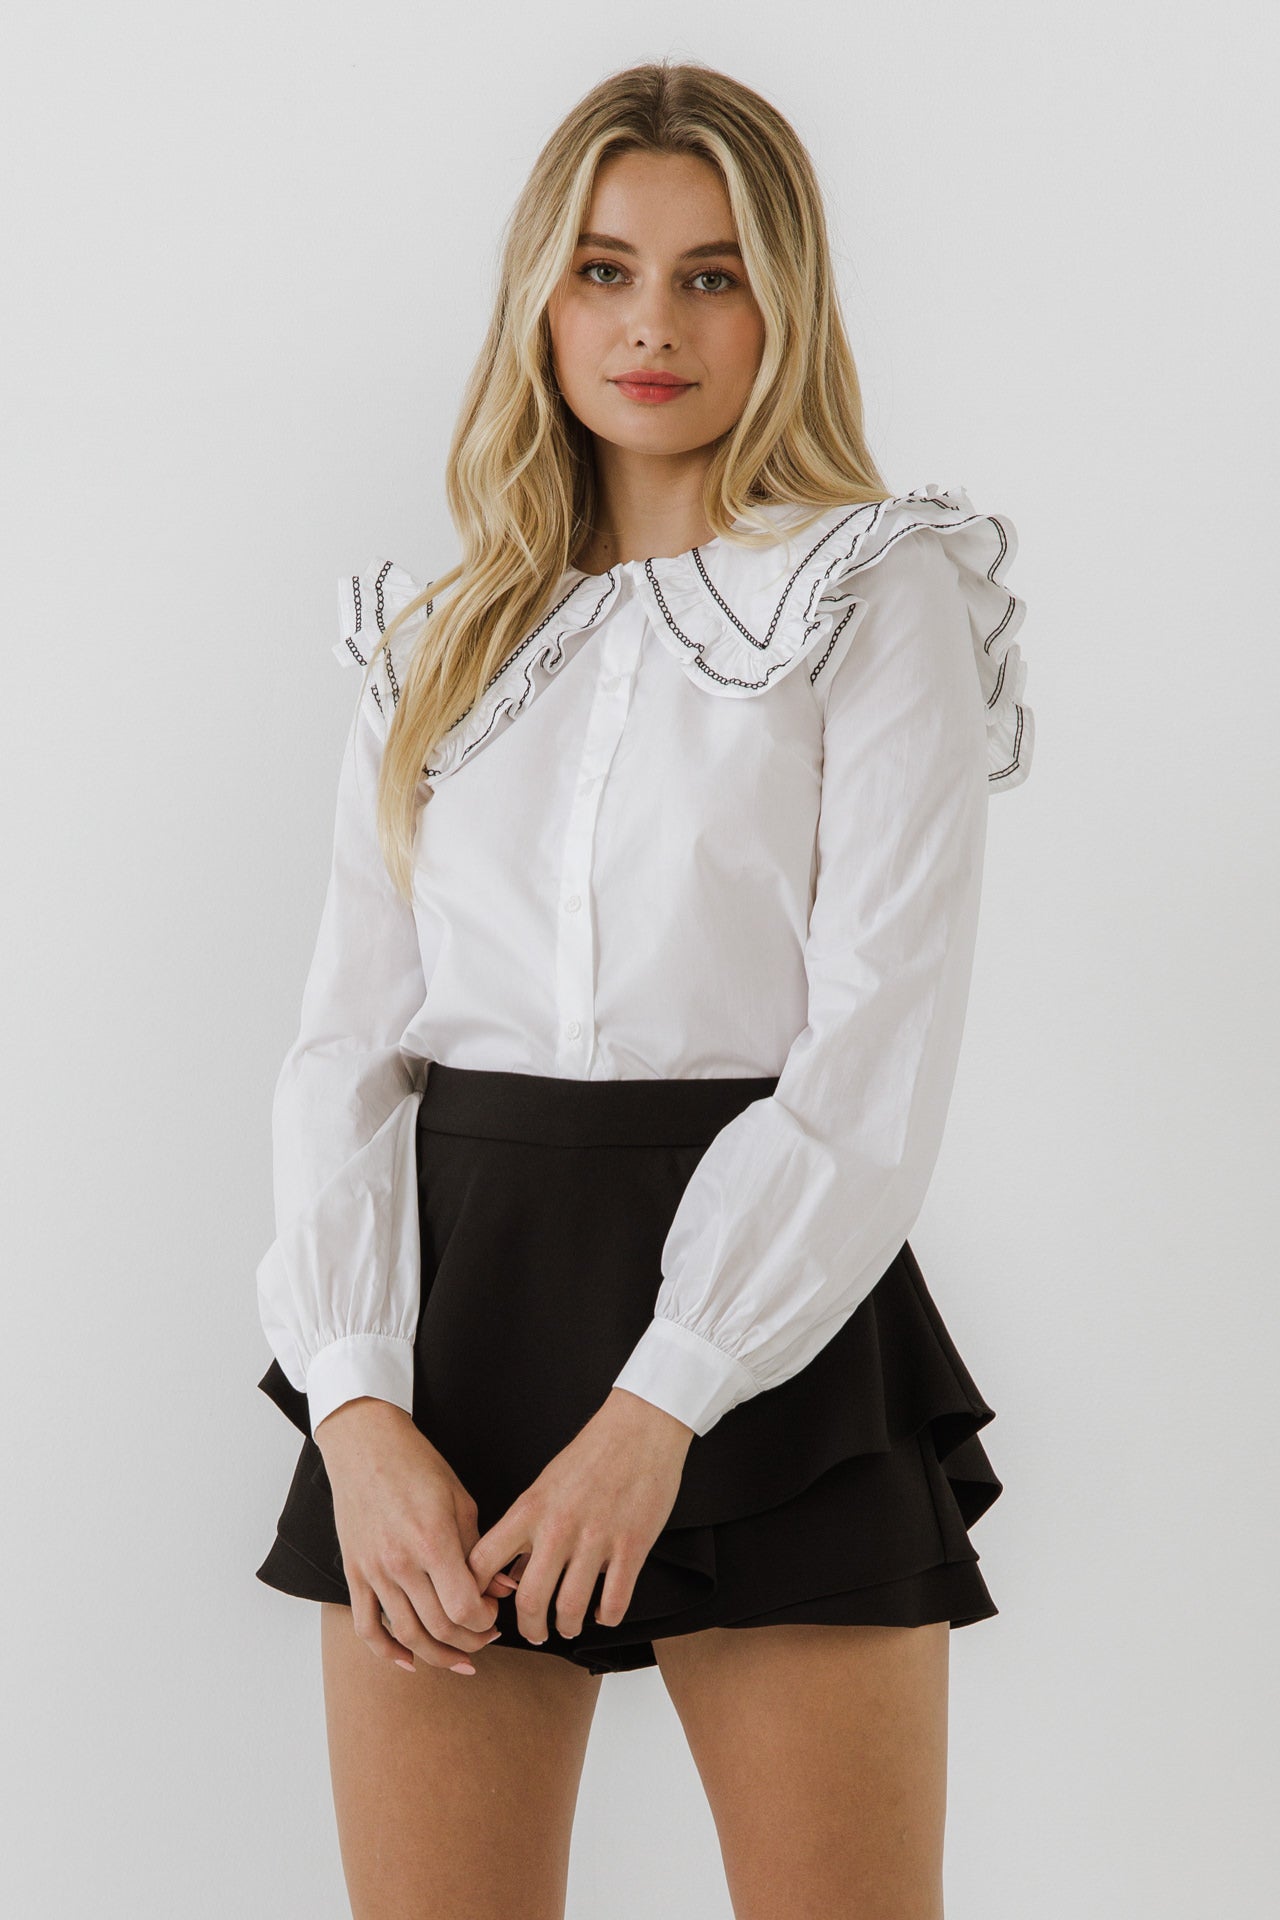 ENGLISH FACTORY - Collared Blouse with Embroidery Trim Details - TOPS available at Objectrare